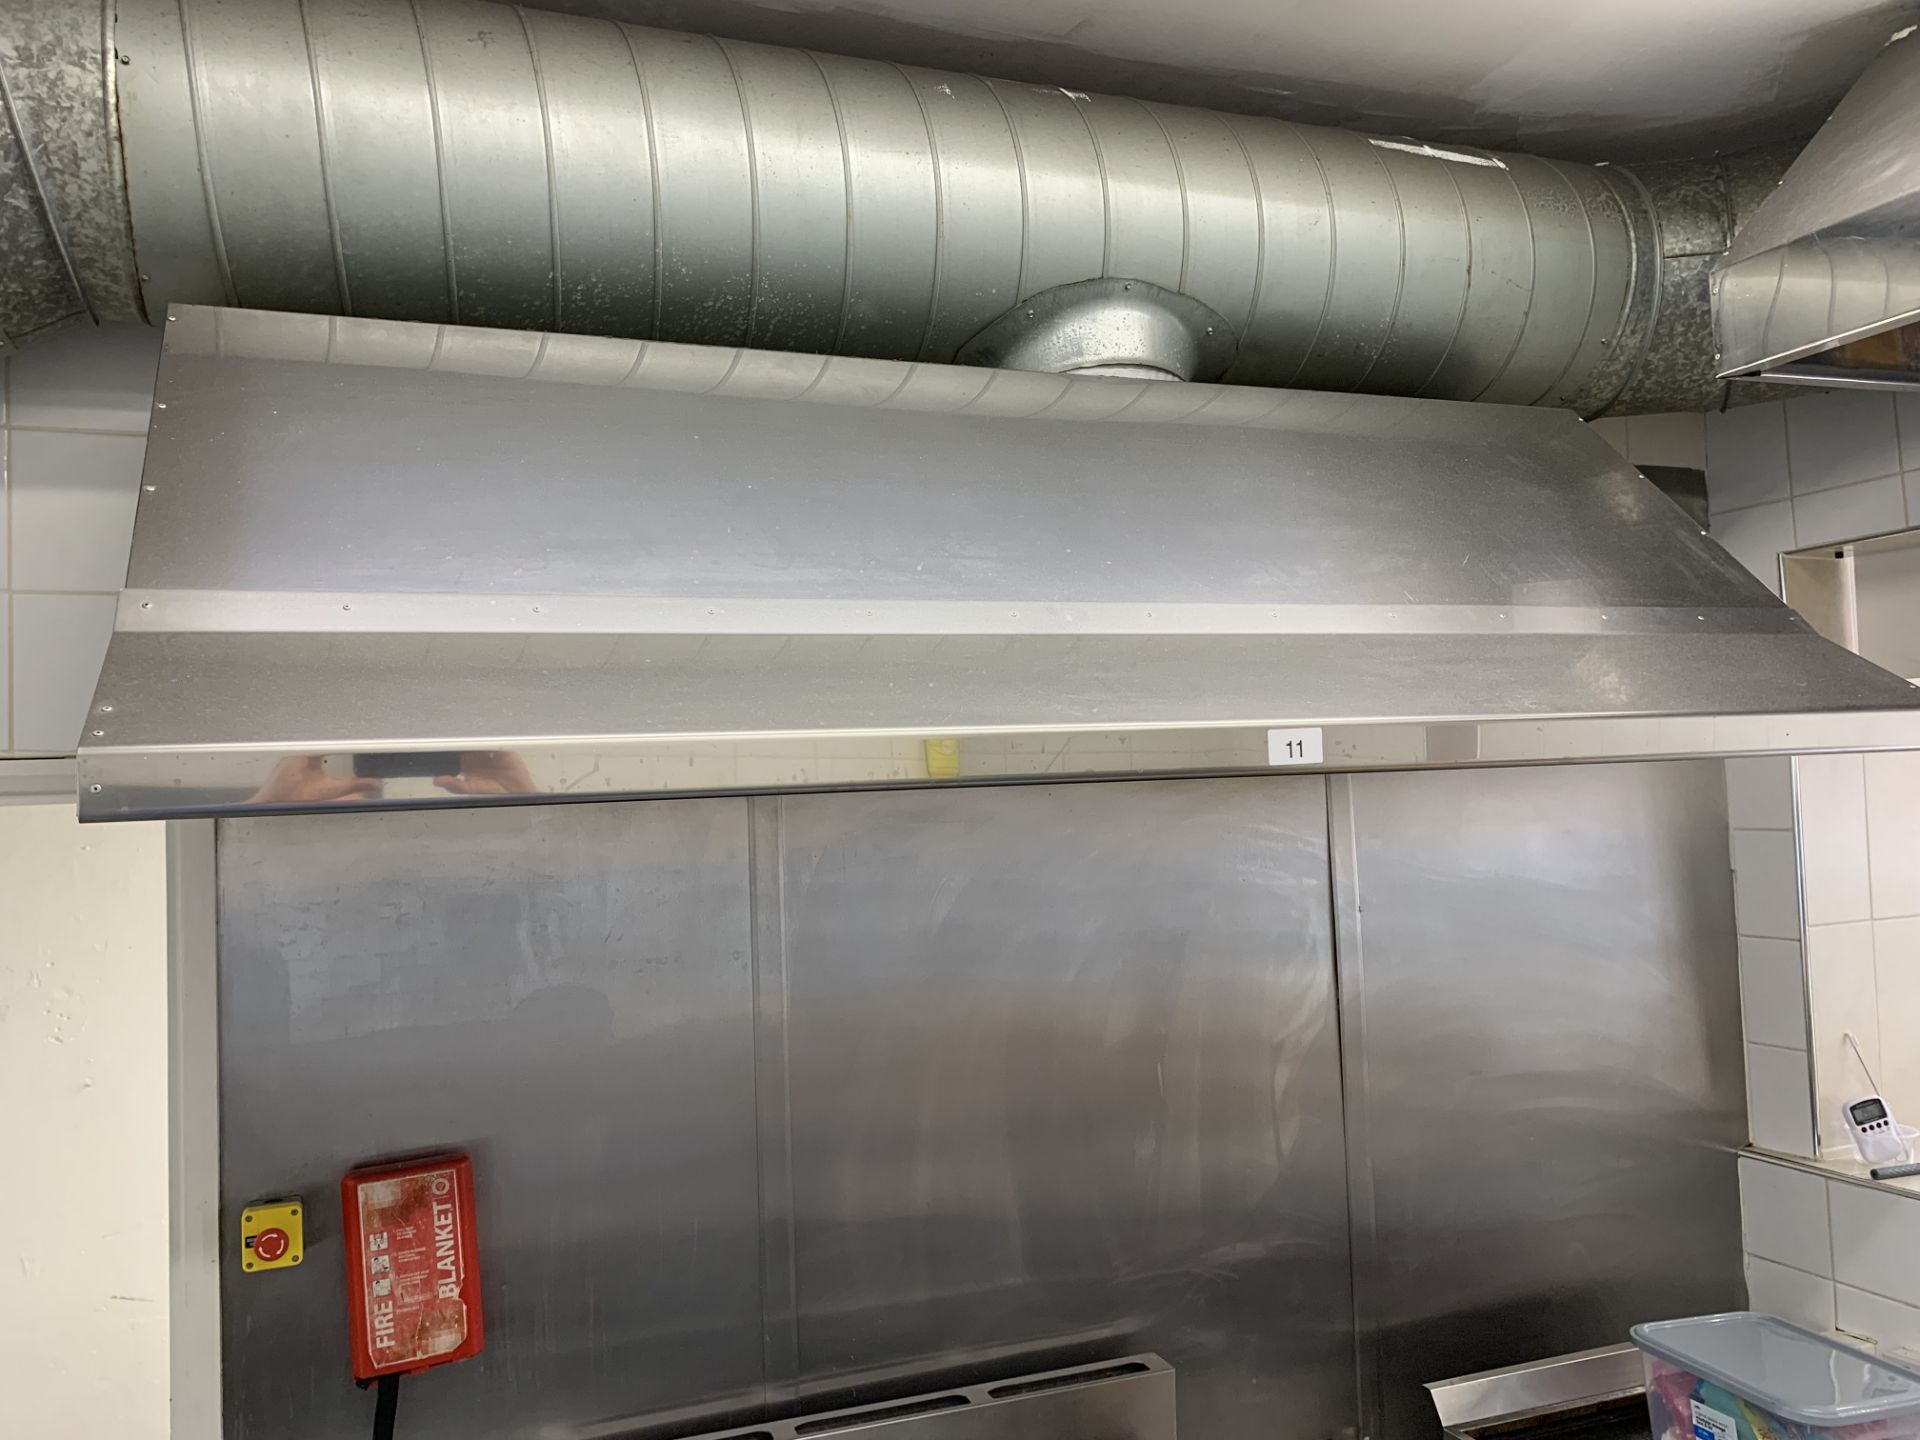 Stainless Steel Extraction Canopy with filters 183cm w x 96cm d x 50cm h